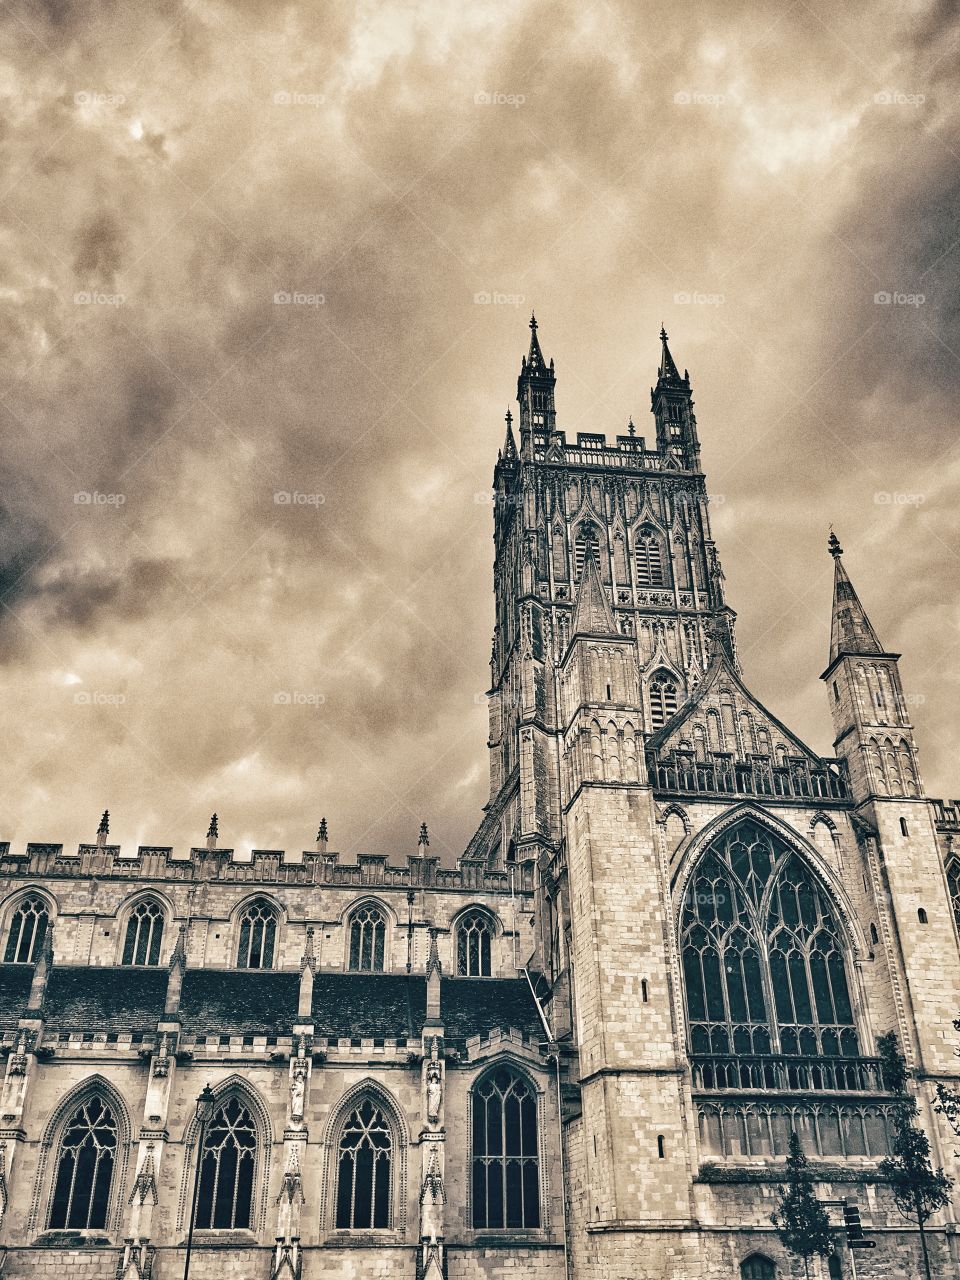 Epic image of Gloucester cathedral with Dark sky